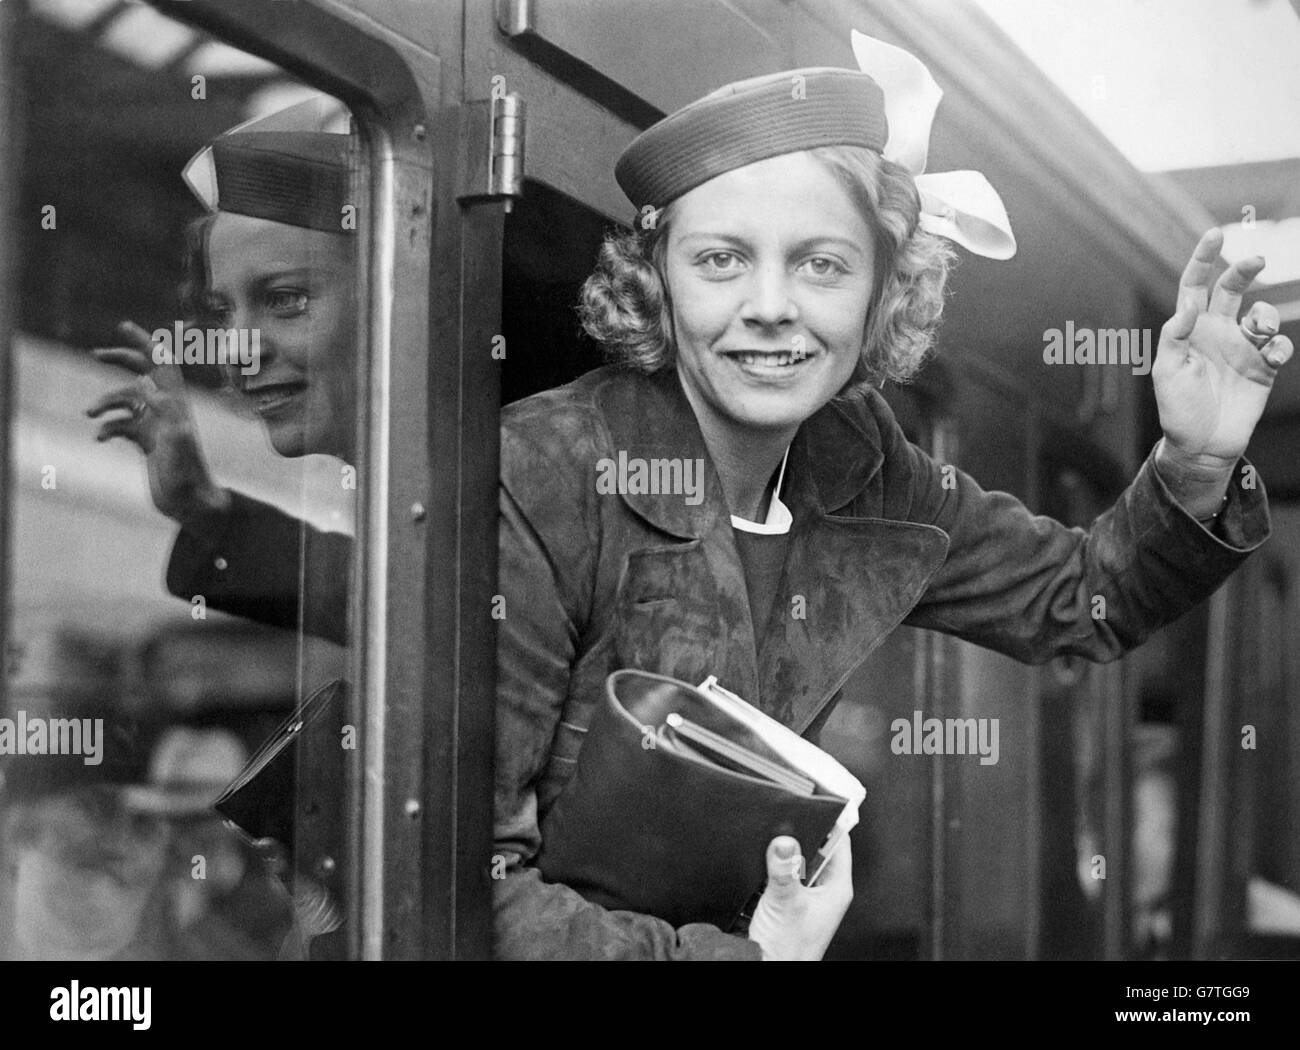 Alice Marble - London - 1937. American tennis star Alice Marble waves out of her carriage window as she leaves London. Stock Photo